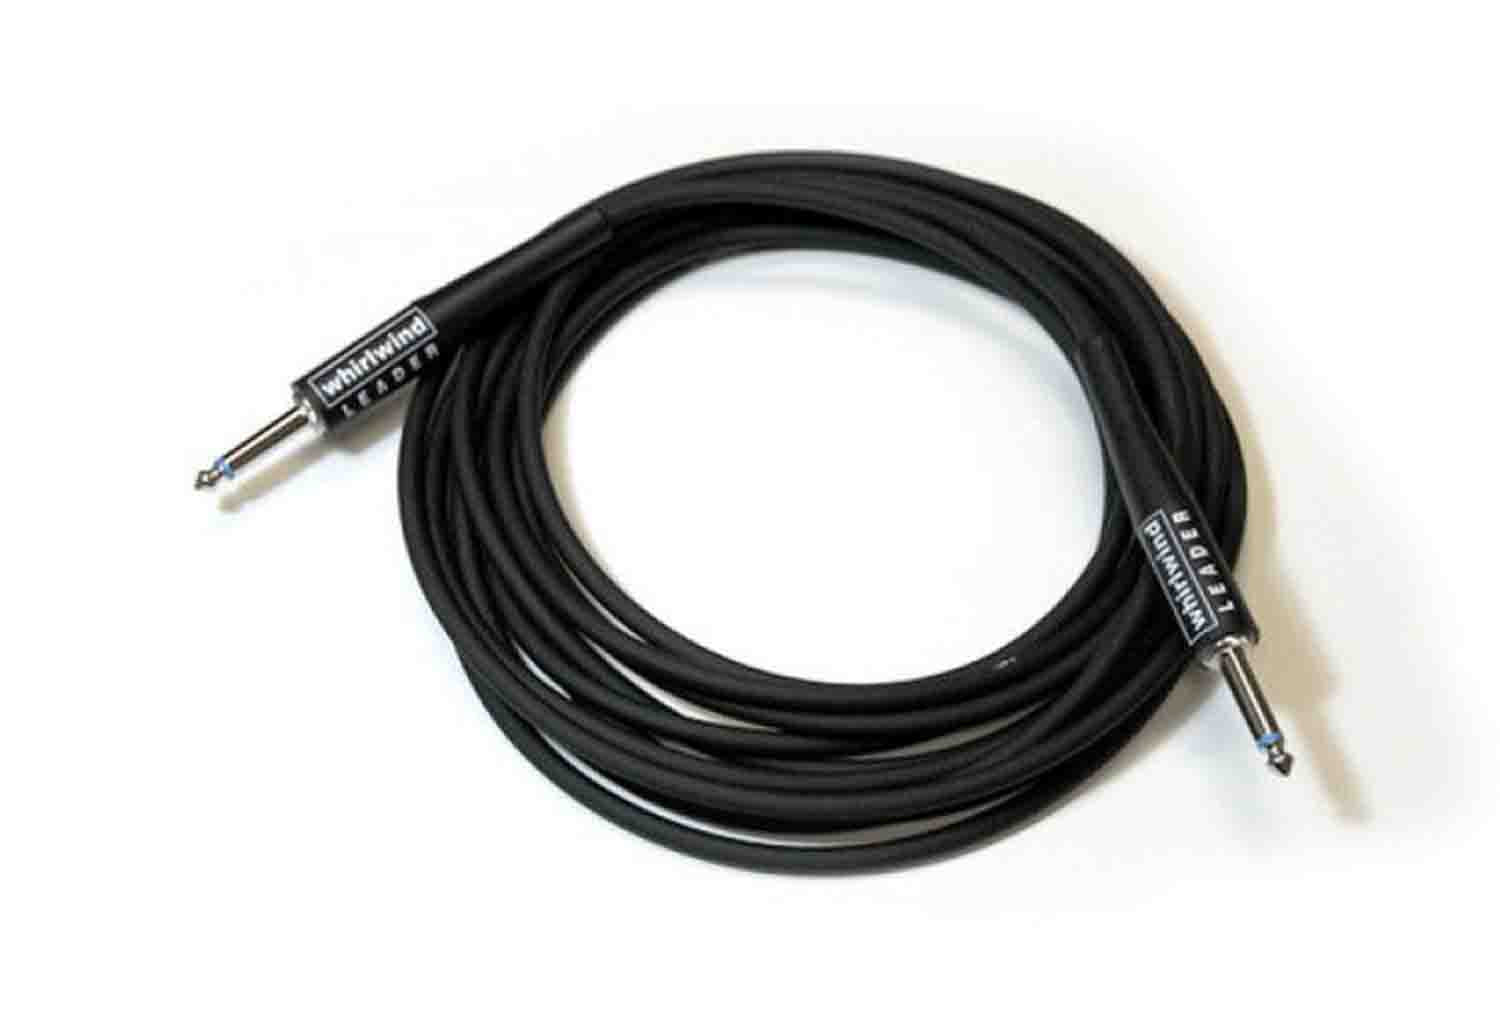 Whirlwind L18 Straight to Straight Instrument Leader Cable - 18 Foot - Hollywood DJ